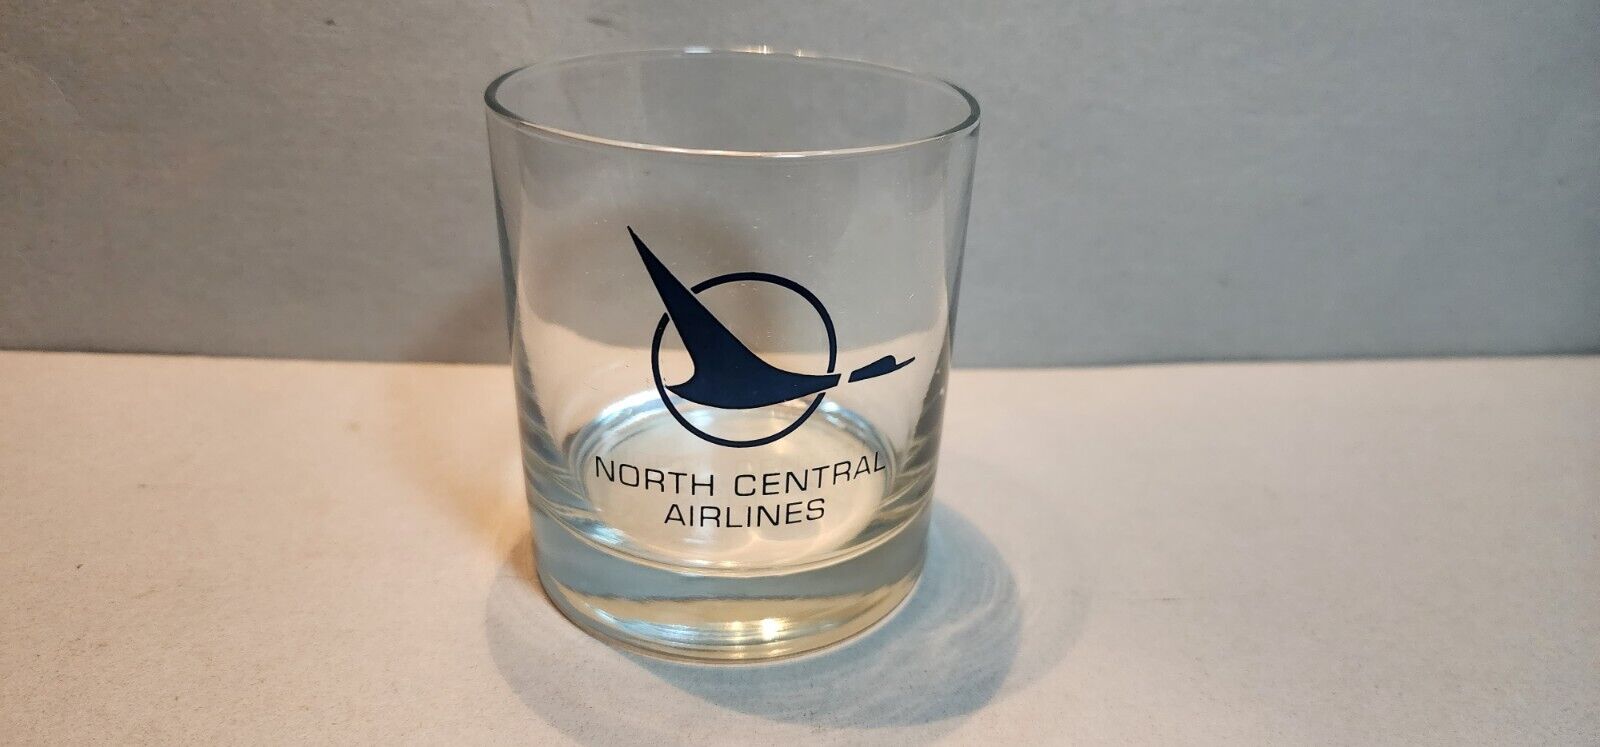 NORTH CENTRAL AIRLINES ROCKS GLASS